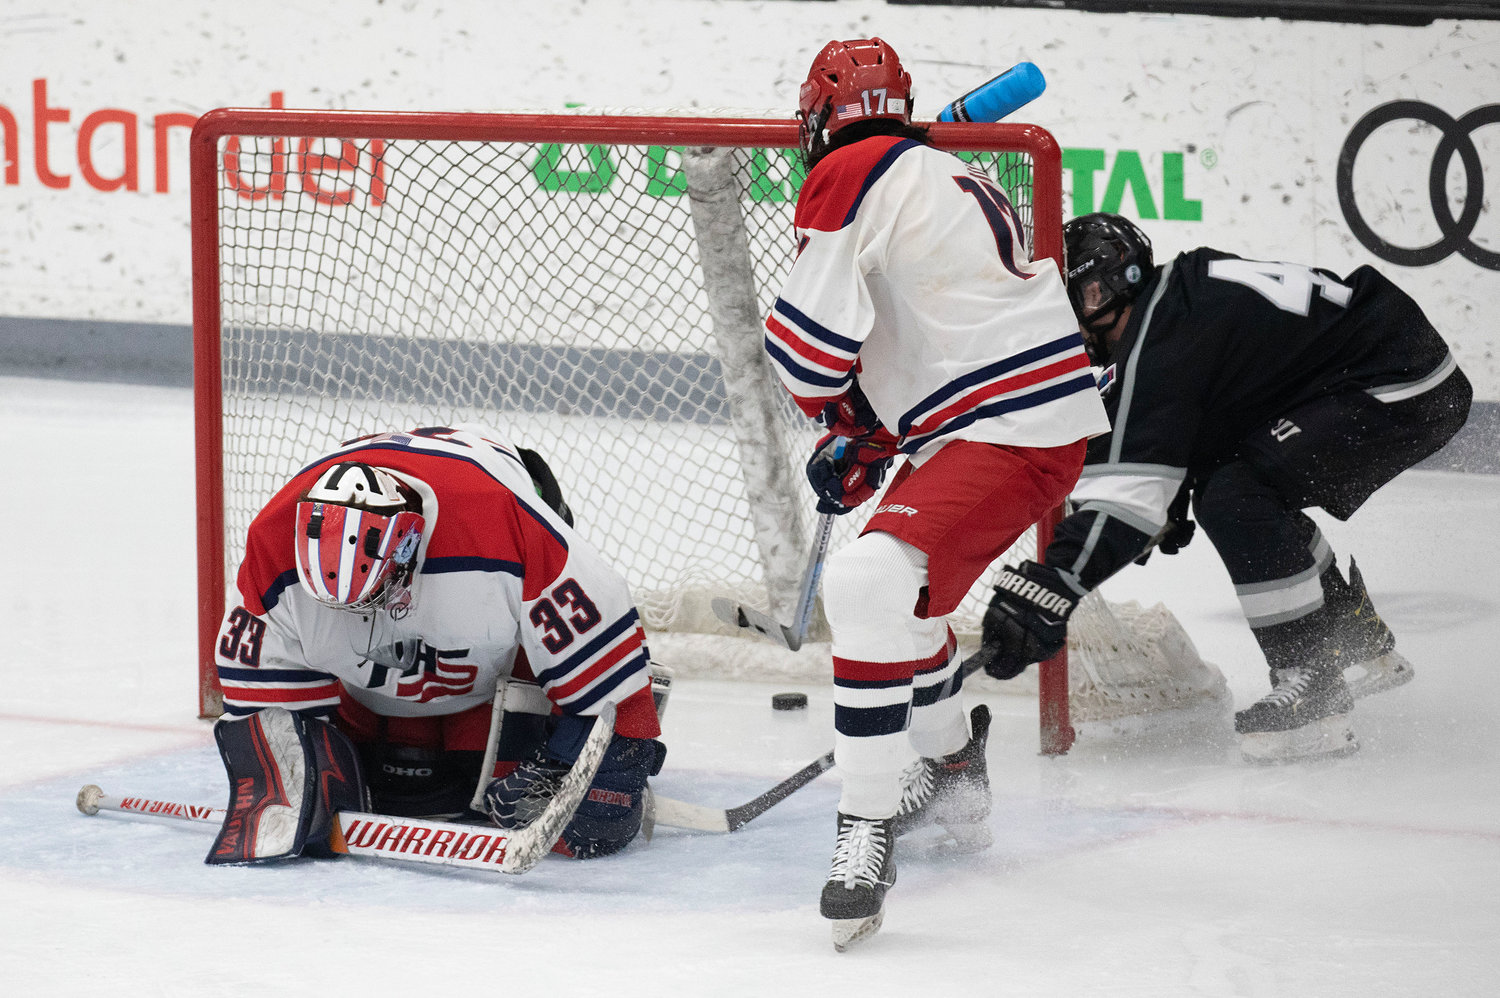 Keaton O’Shea stuffs the puck between Patriots’ goaltender Stephen Dutra’s legs and it trickles into the back of the net to give RMT a 2-1 lead with 6 minutes to play.